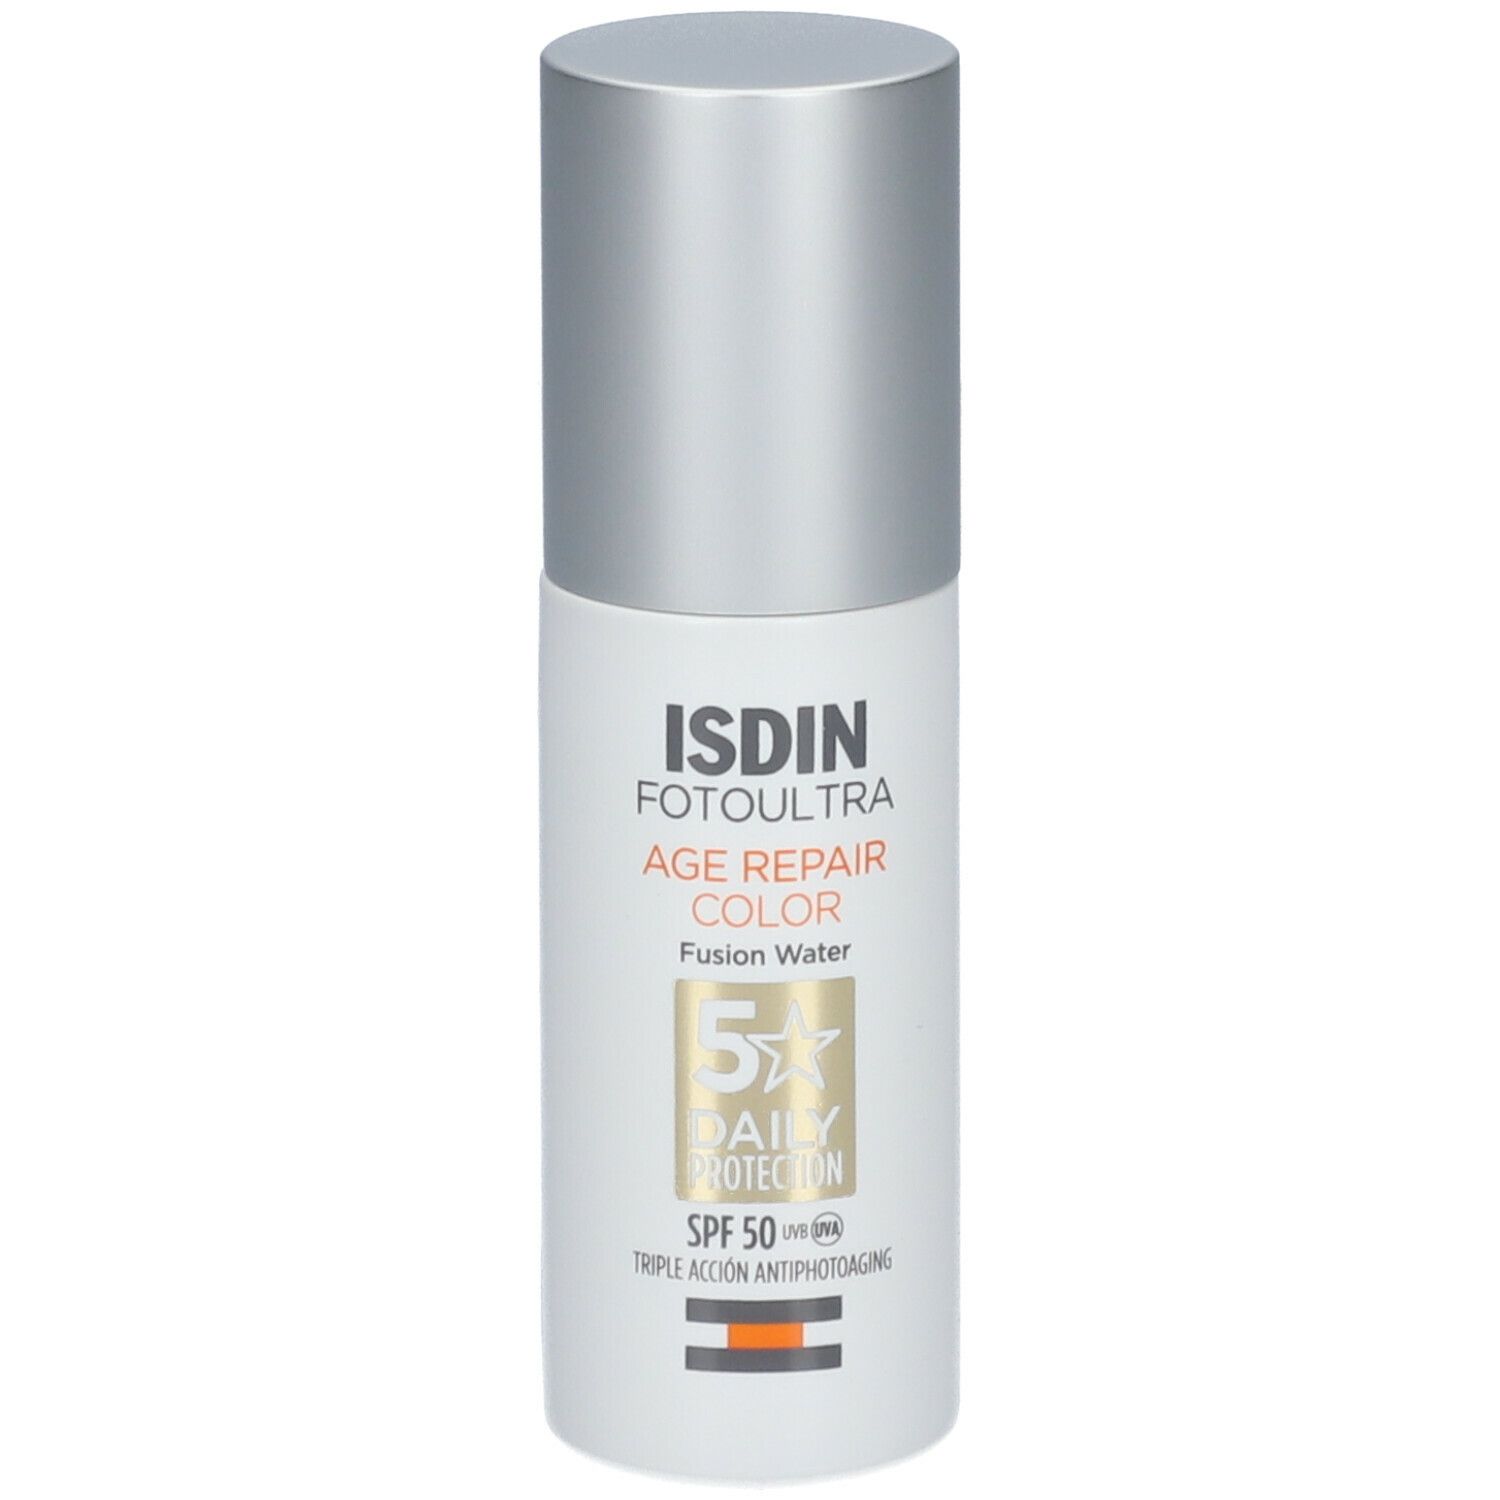 Isdin FotoUltra Age Repair Color Fusion Water Spf50